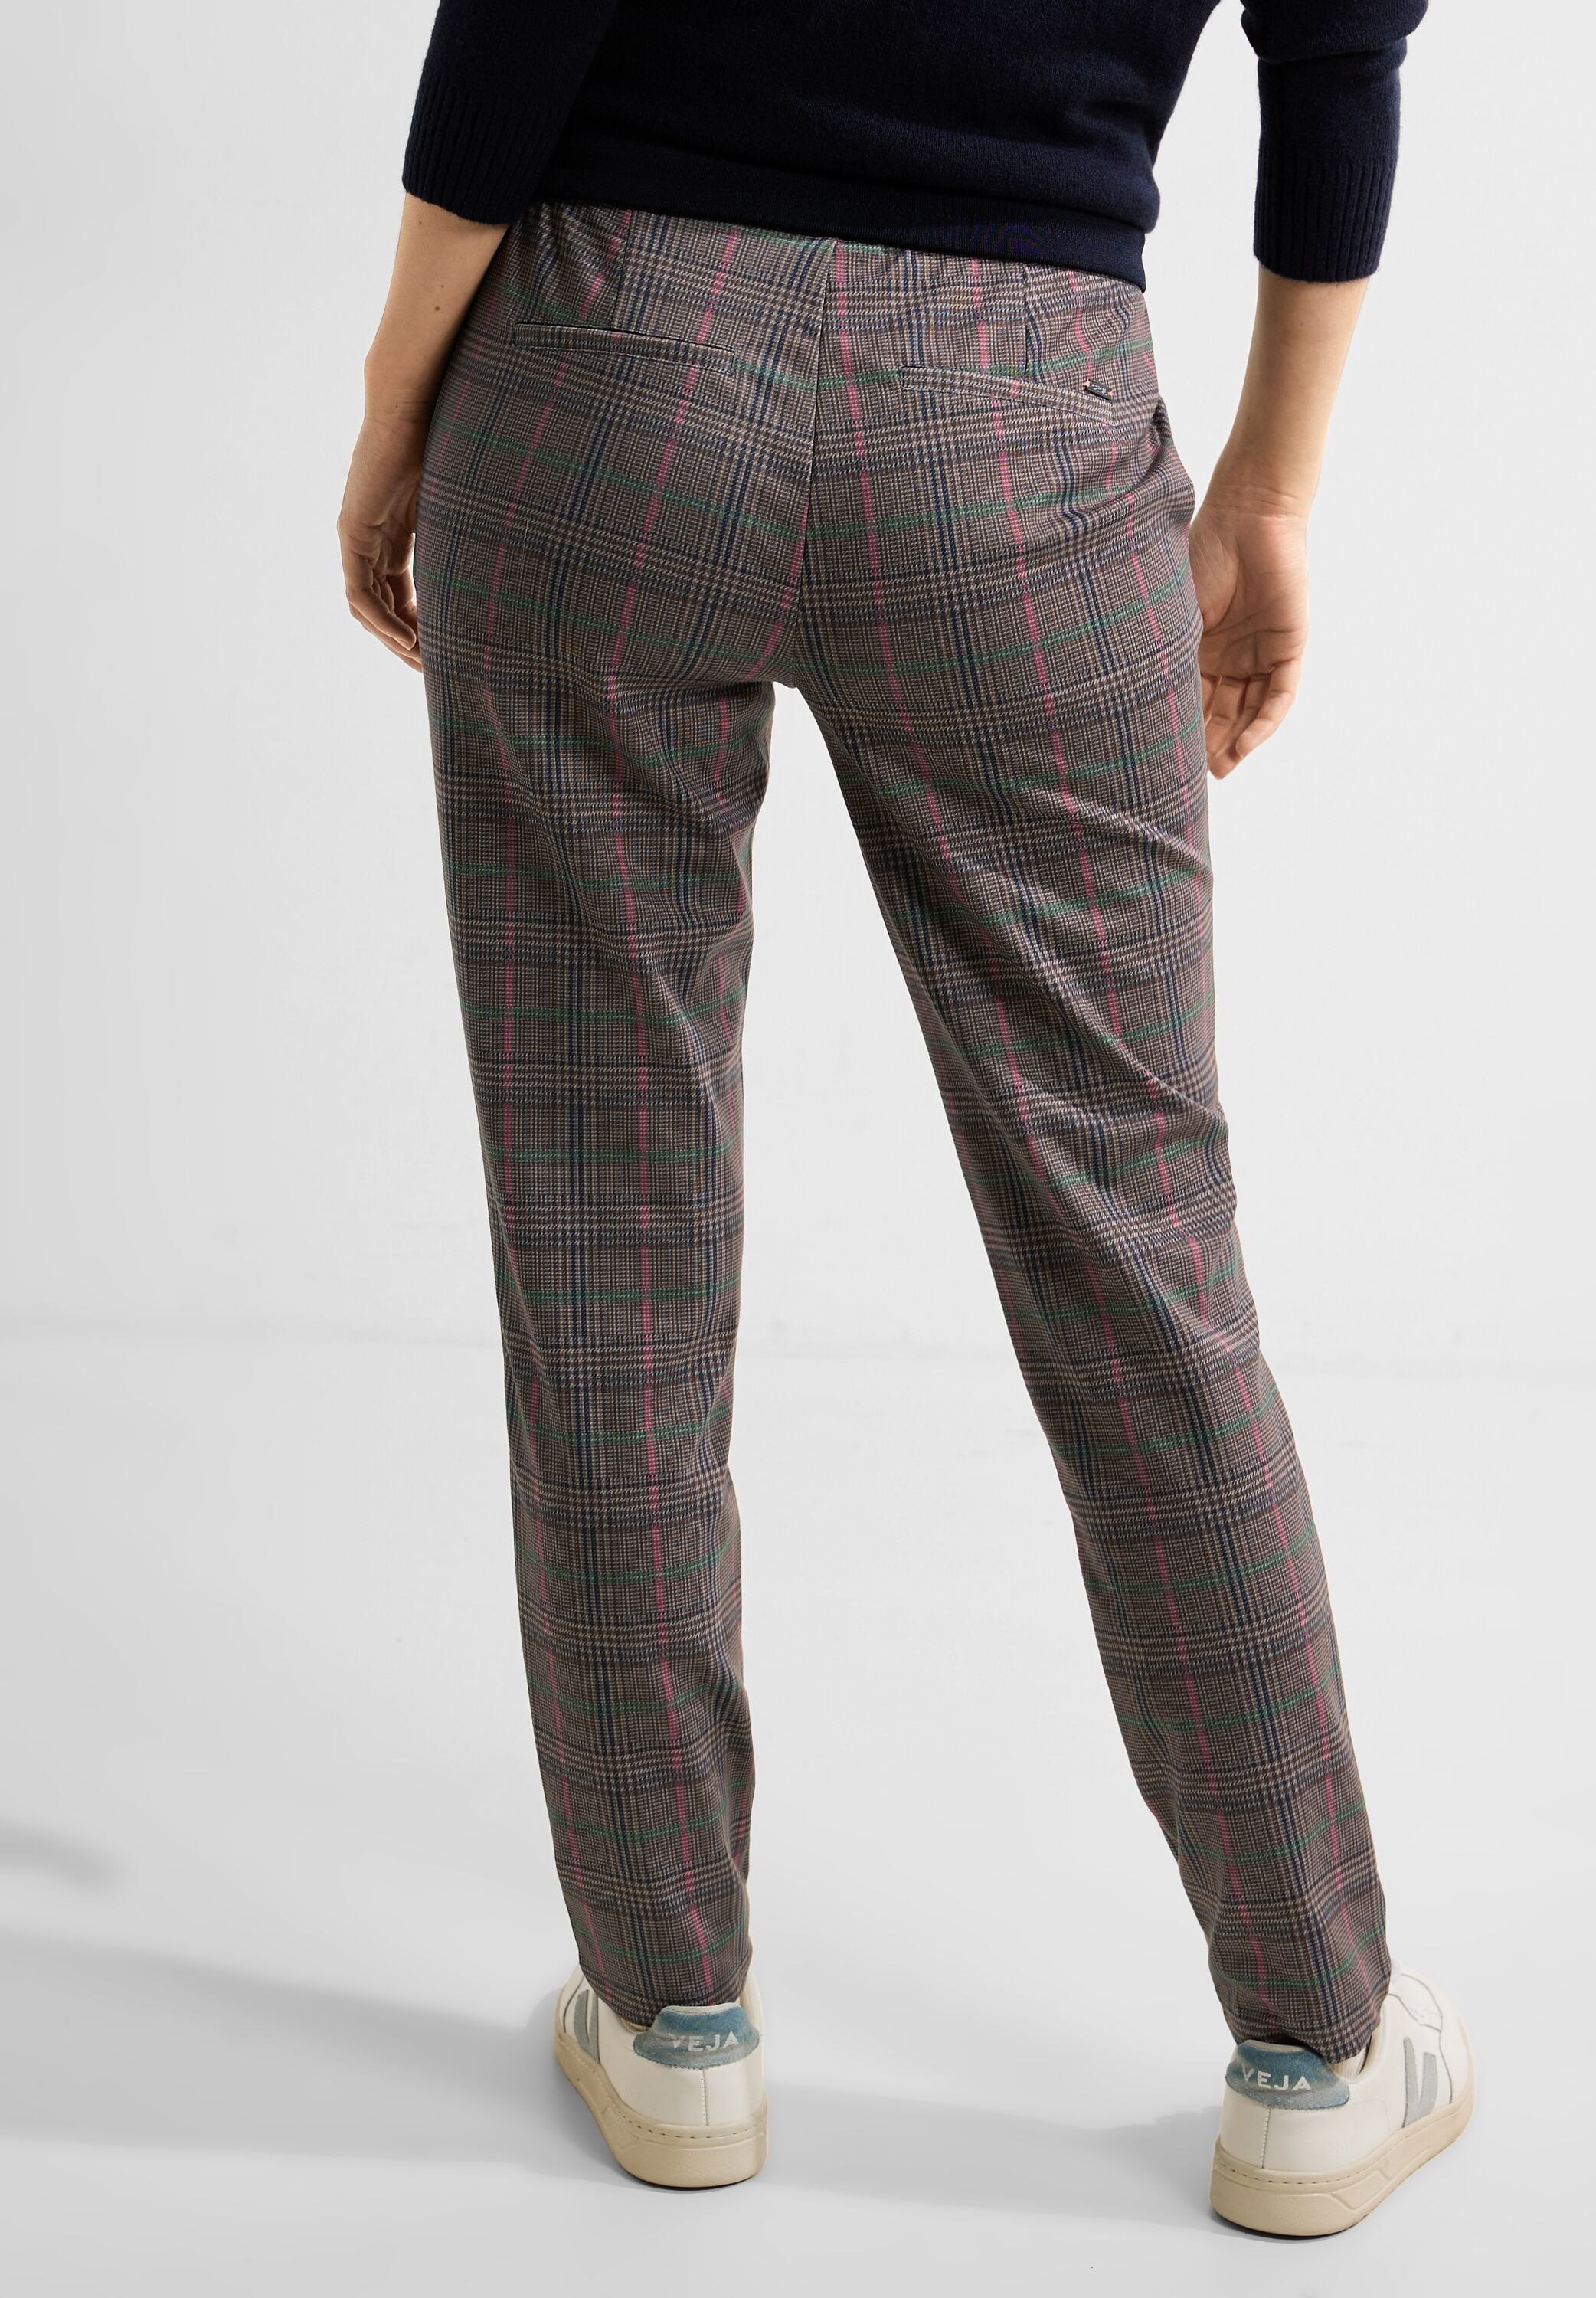 ♕ bei Cecil Check«, Pants Jogger Karomuster Tracey »Damenhose